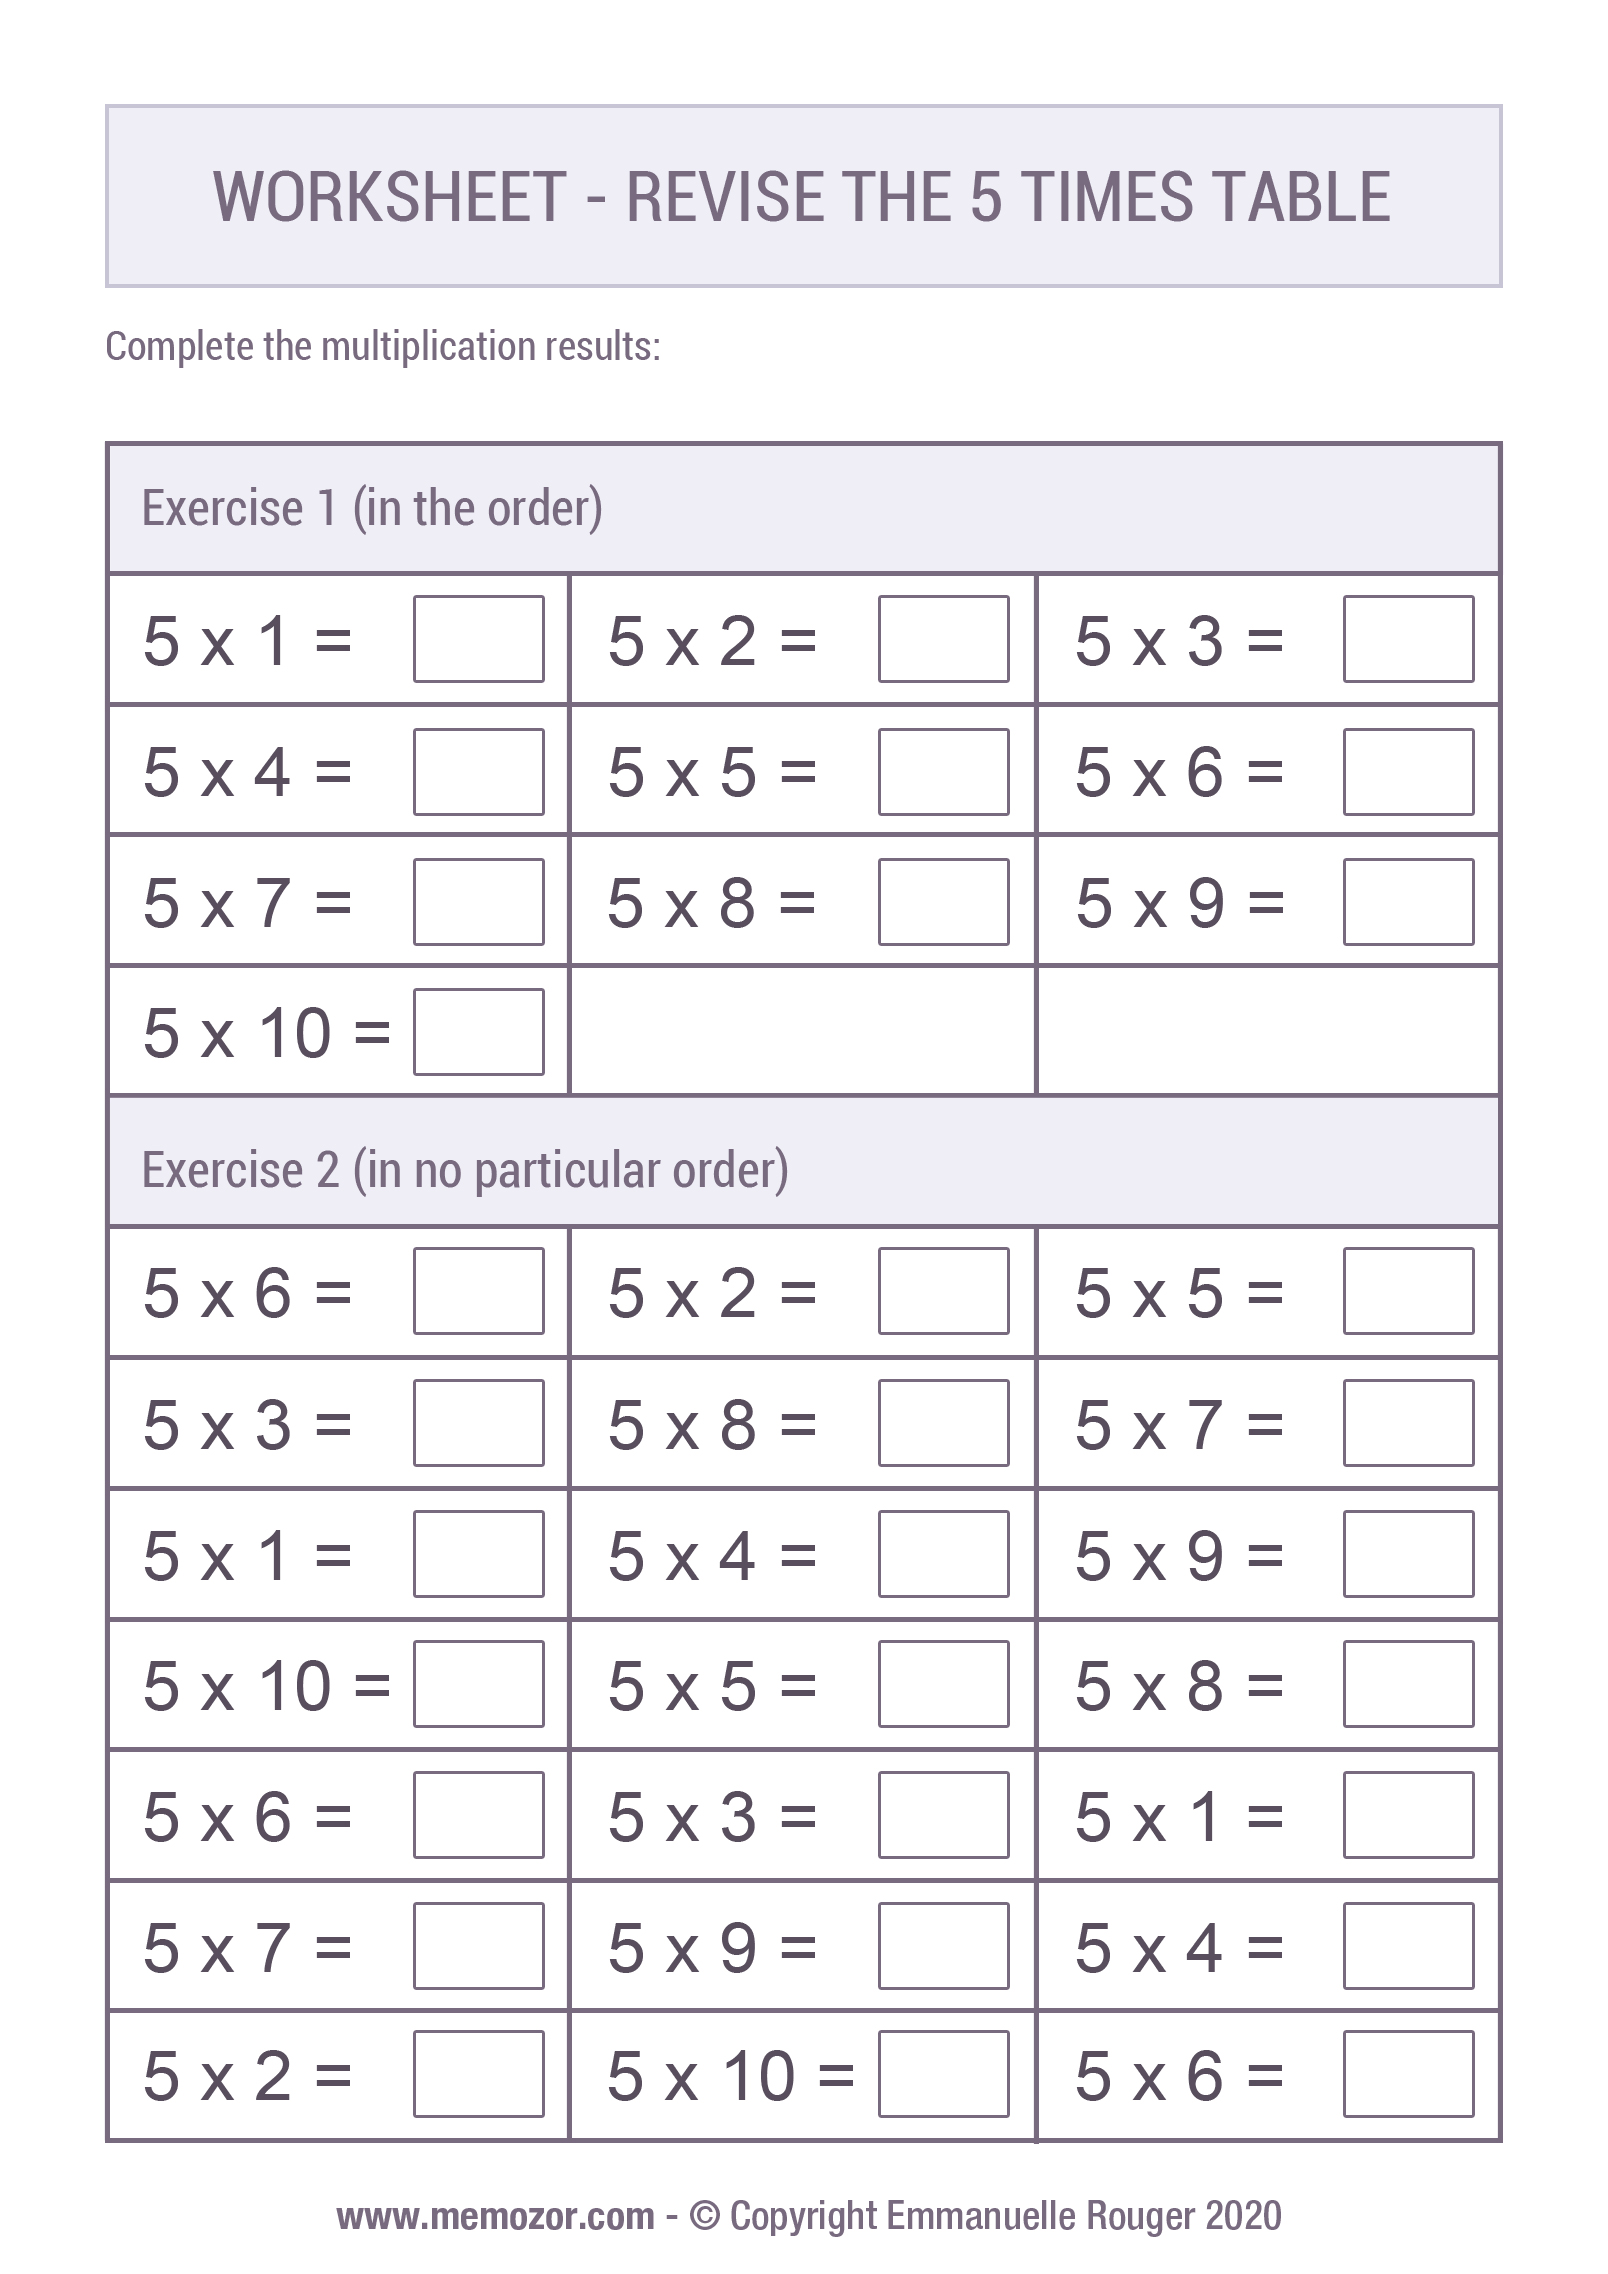 Worksheet to print Revise the 5 times Table Memozor